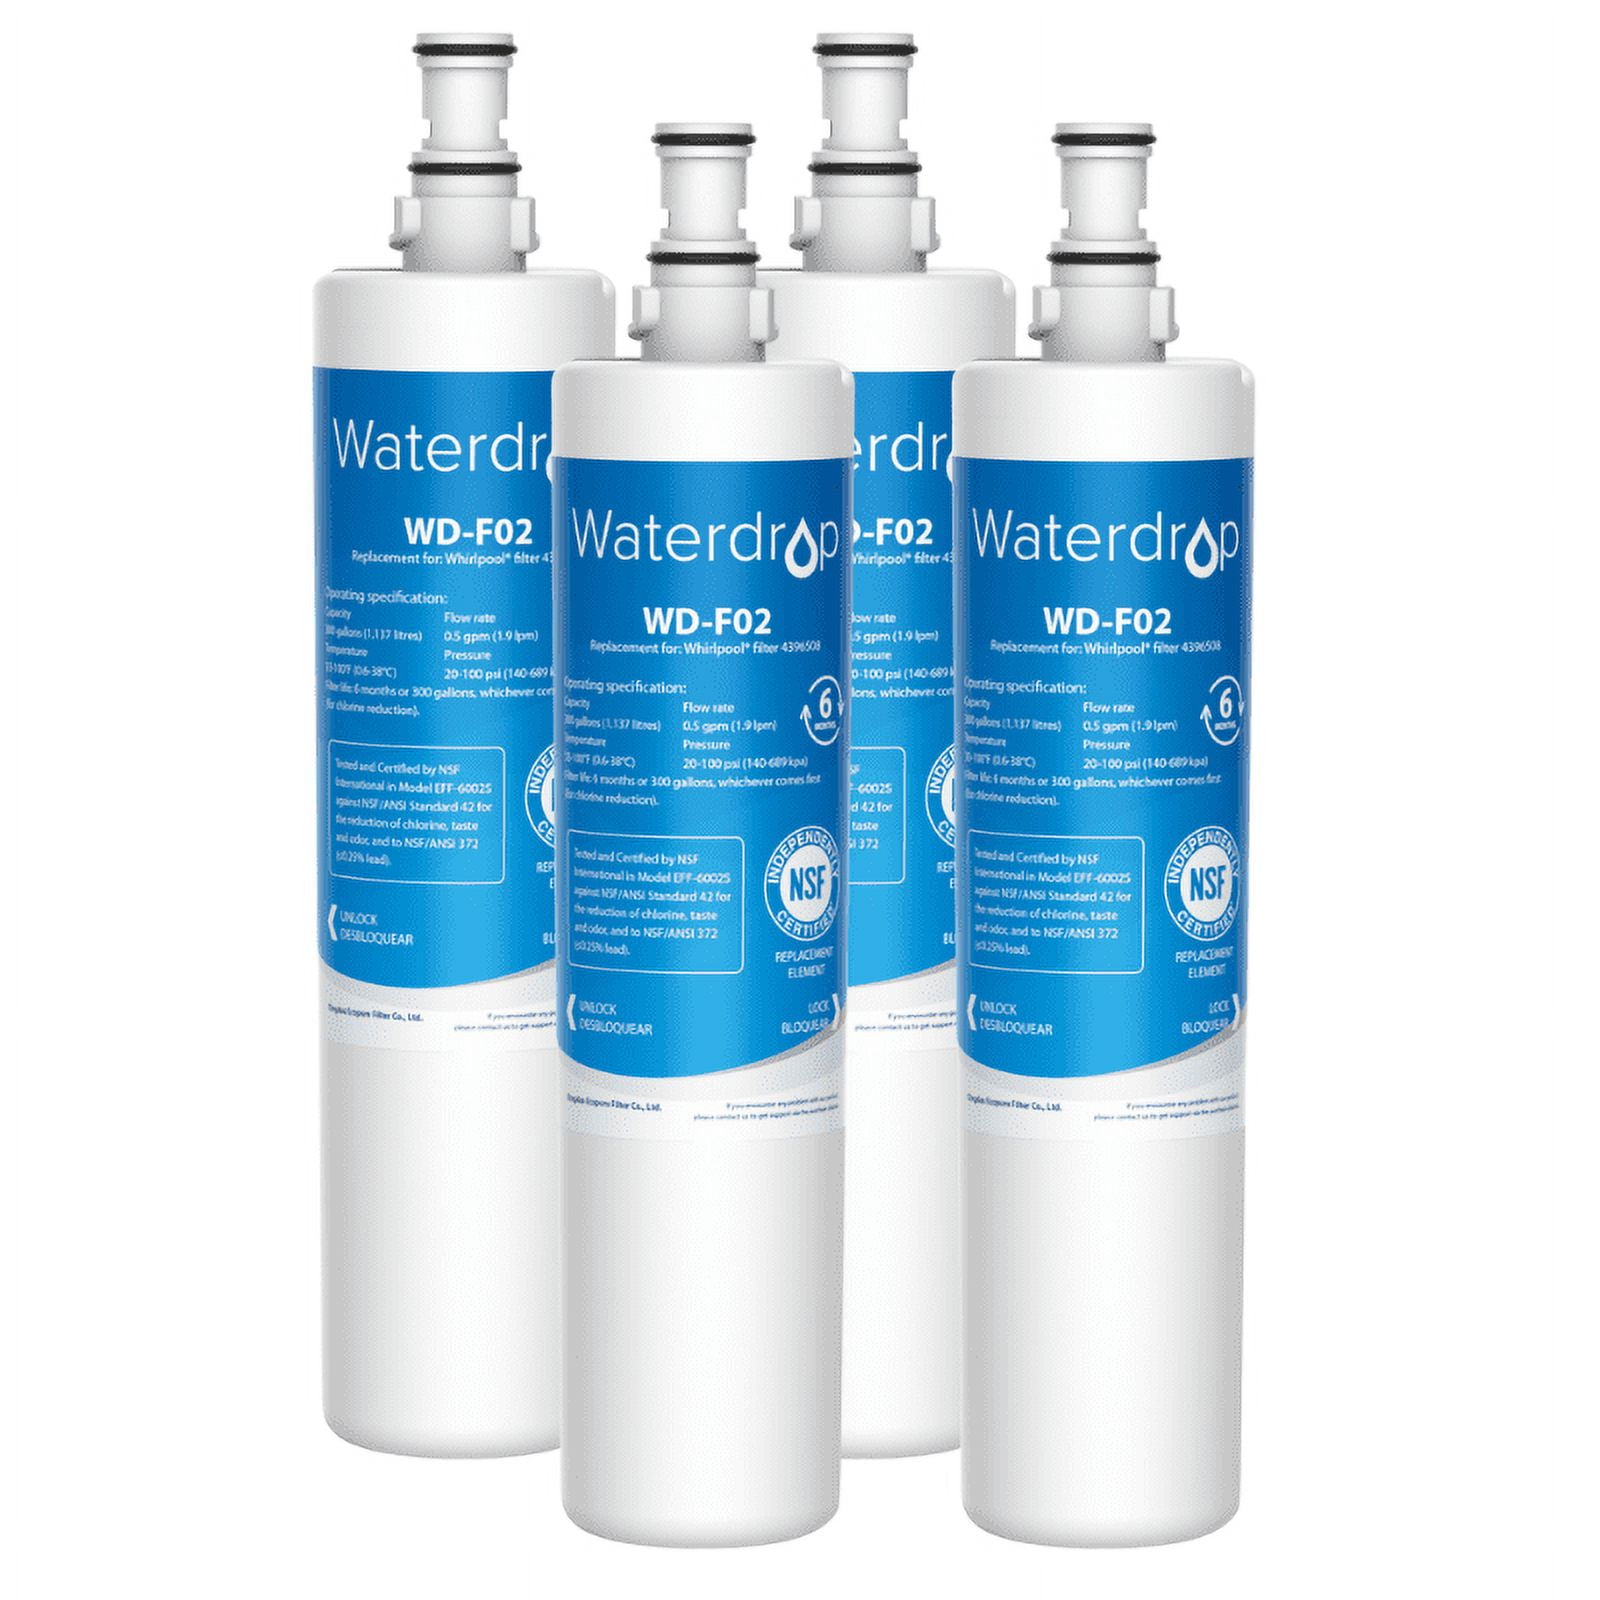 3-Pack Replacement Whirlpool W10186668 Refrigerator Water Filter - Compatible Whirlpool 4396508, 4396510 Fridge Water